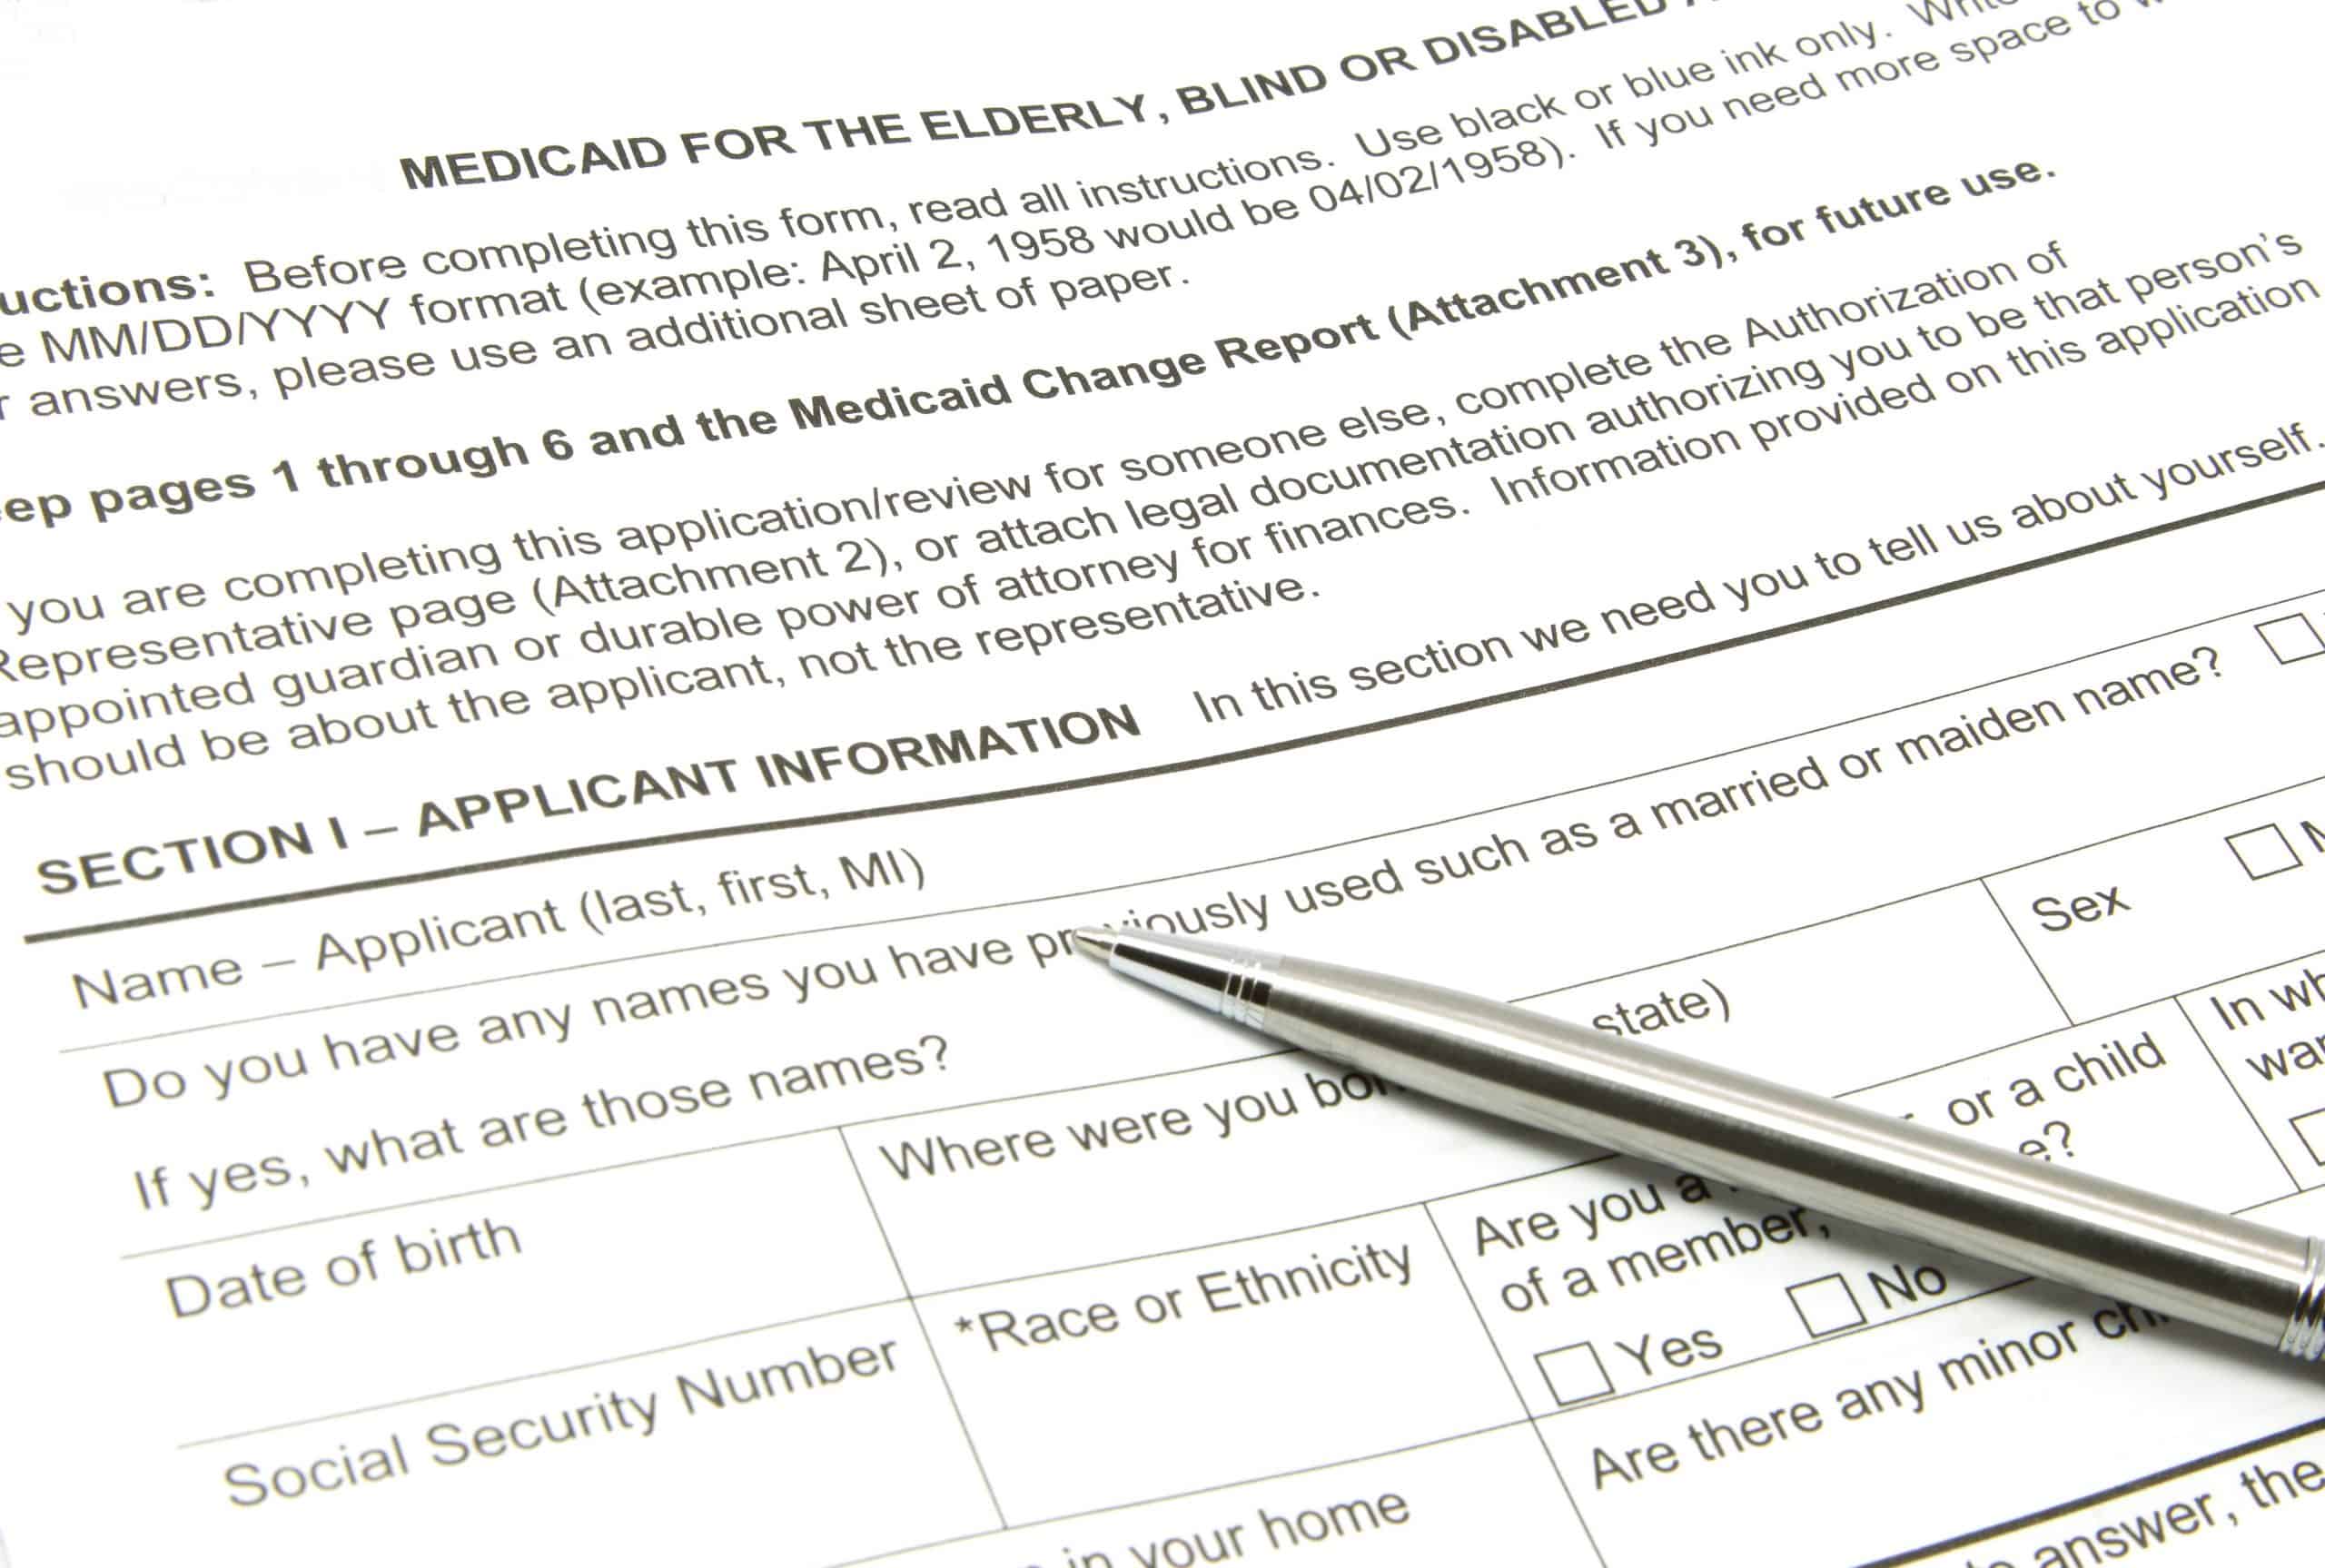 A Medicaid application ready to be filled out